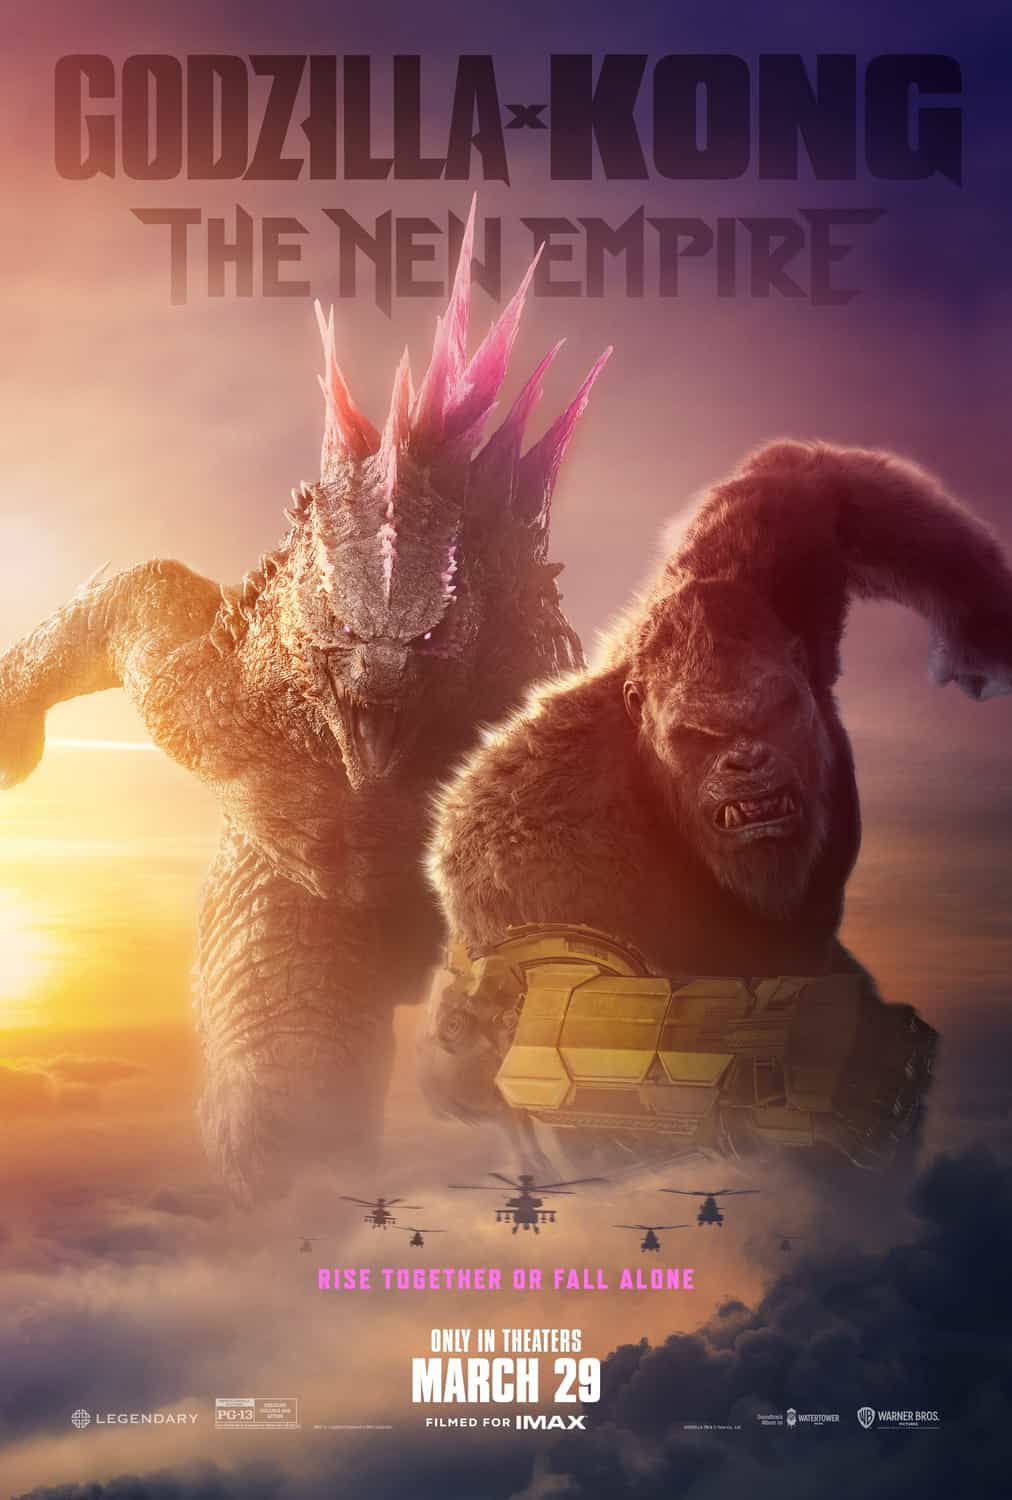 This weeks UK new movie preview 29th March 2024 - Godzilla x Kong: The New Empire, Disco Boy, Mother